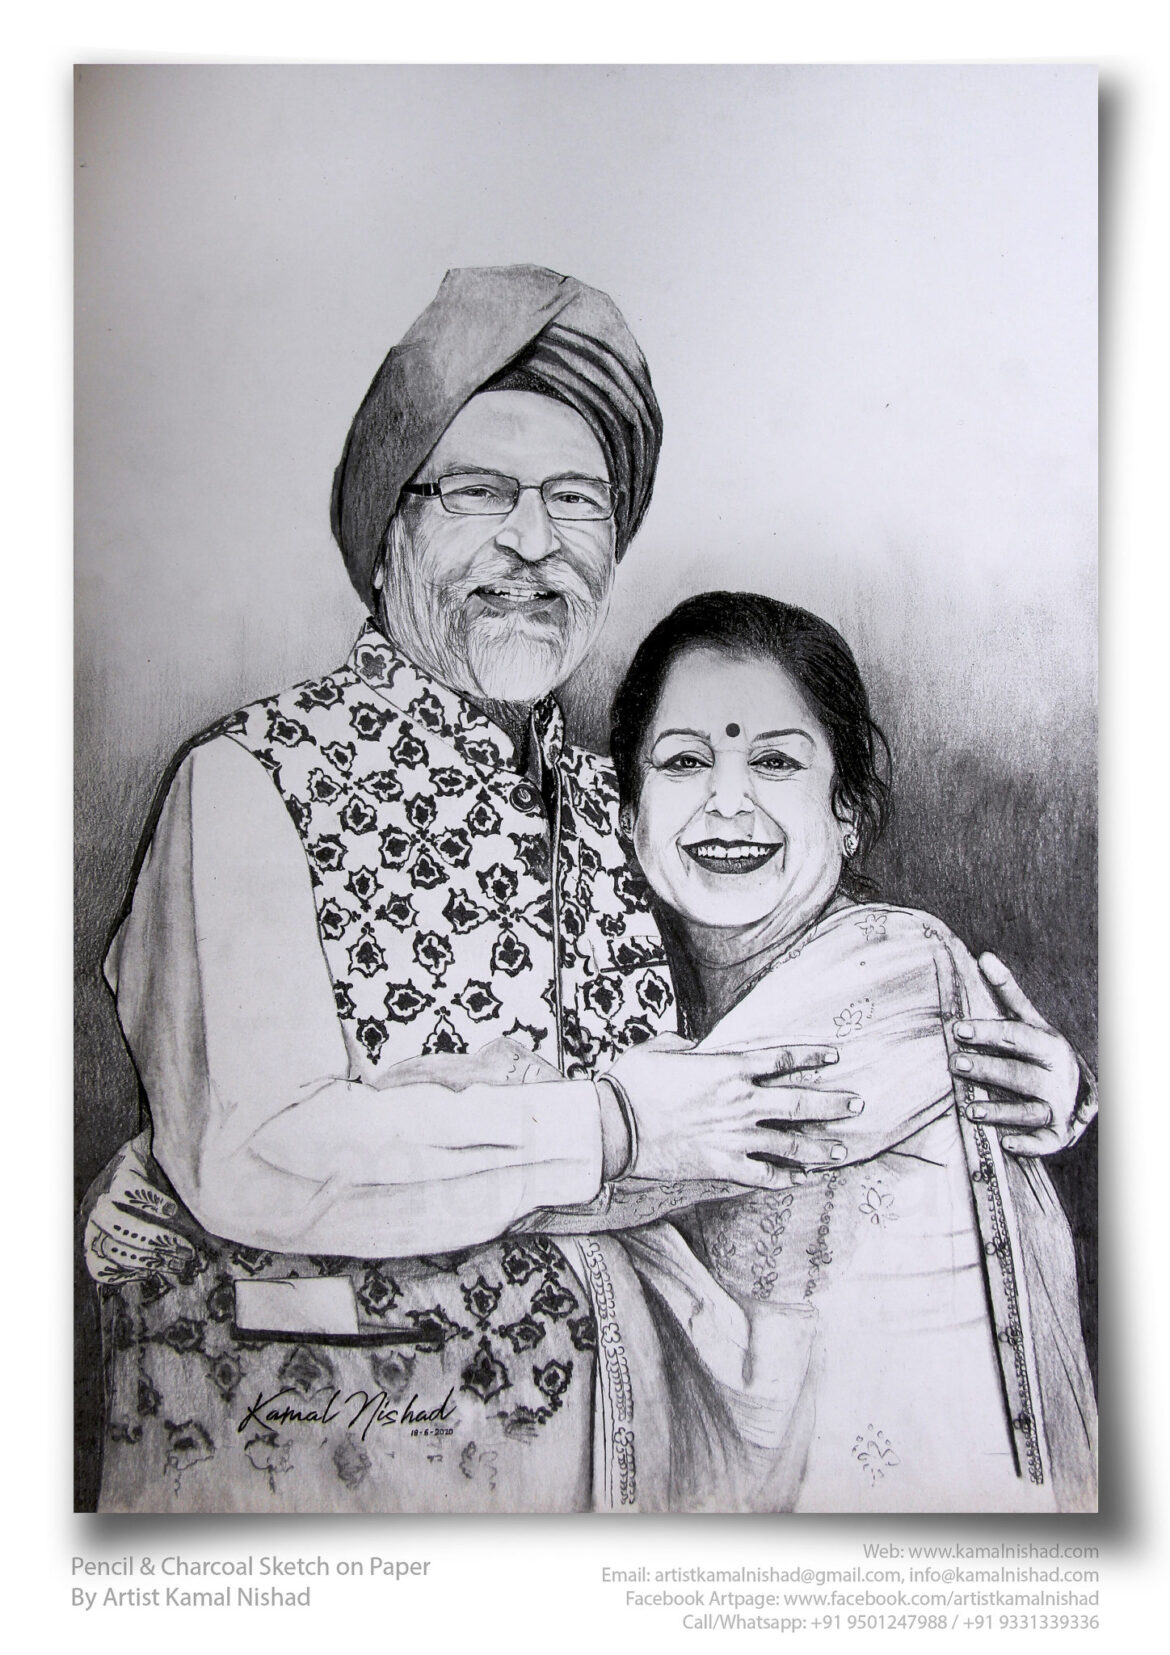 AGELESS BLISS | Pencil & Charcoal Sketch Title : AGELESS BLISS Medium : Pencil & Charcoal Sketch Size : A3 (11.7 x 16.5 inch*) Artist : Kamal Nishad This is a Handmade/hand-drawn Sketch made with Pencil & Charcoal “AGELESS BLISS”. One of my client/customer wanted me to draw this portrait for their anniversary gift. SIZE: A3 (11.7 x 16.5 inches *estimated) Created by © Kamal Nishad. All rights reserved.